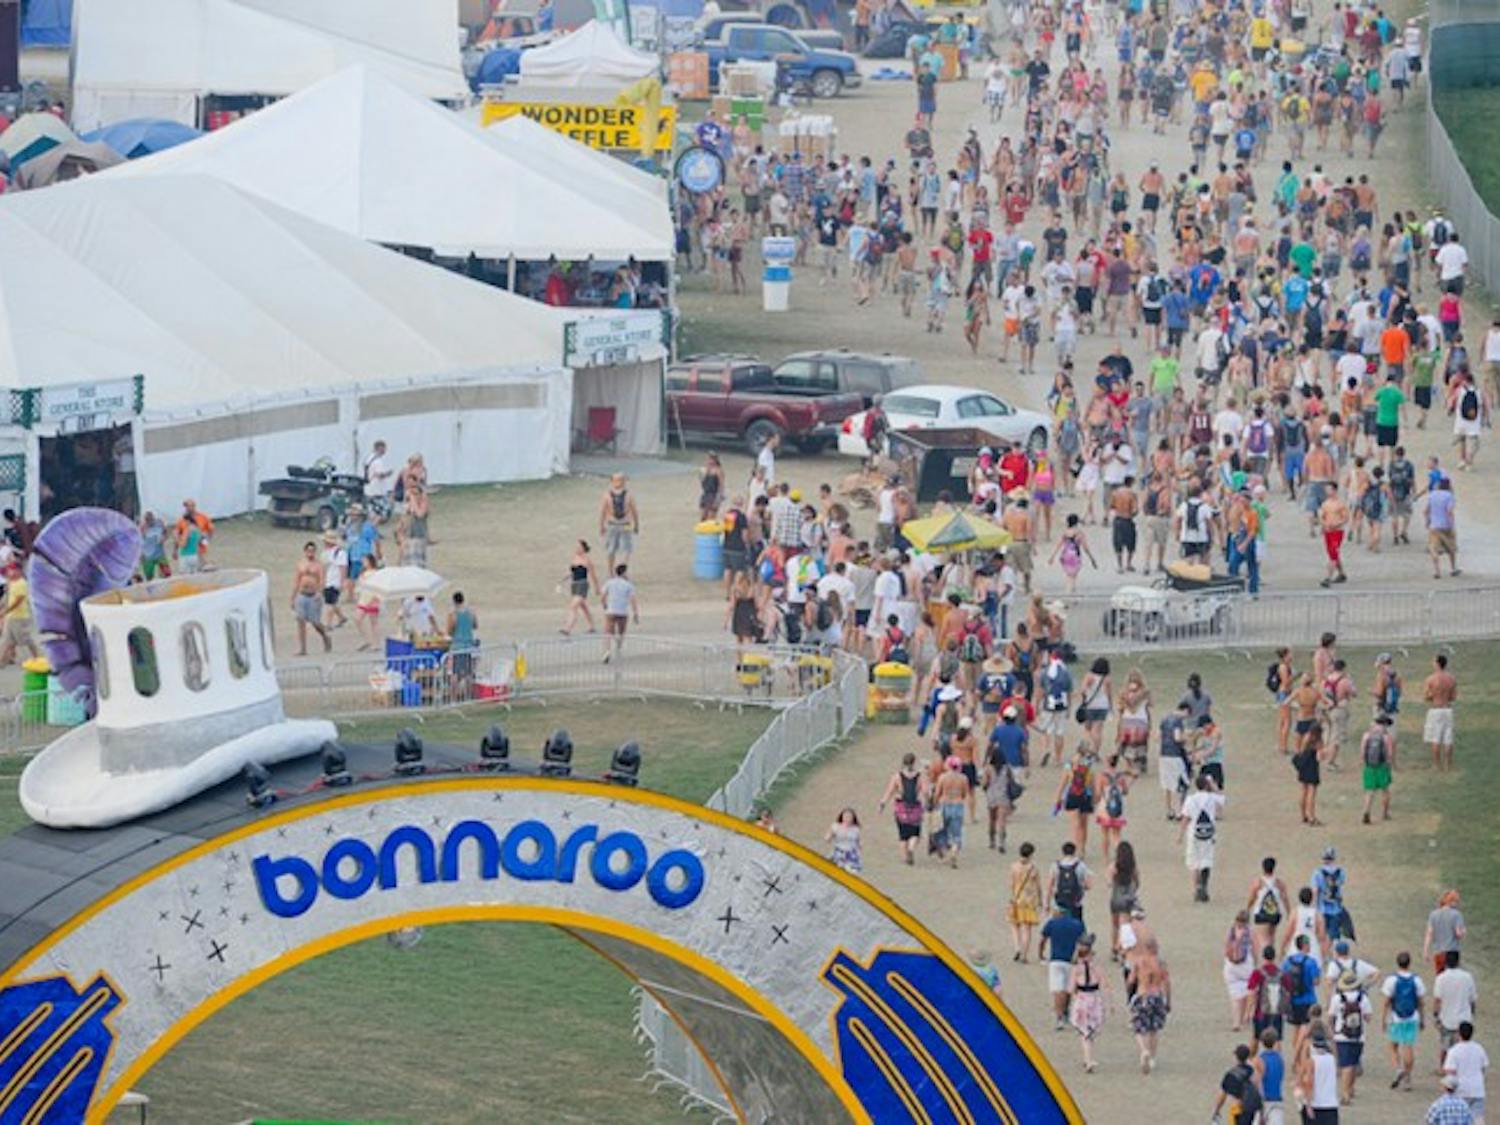 2011’s Bonnaroo festival marked its 10th anniversary, and the arch donned a giant feathered hat to celebrate.